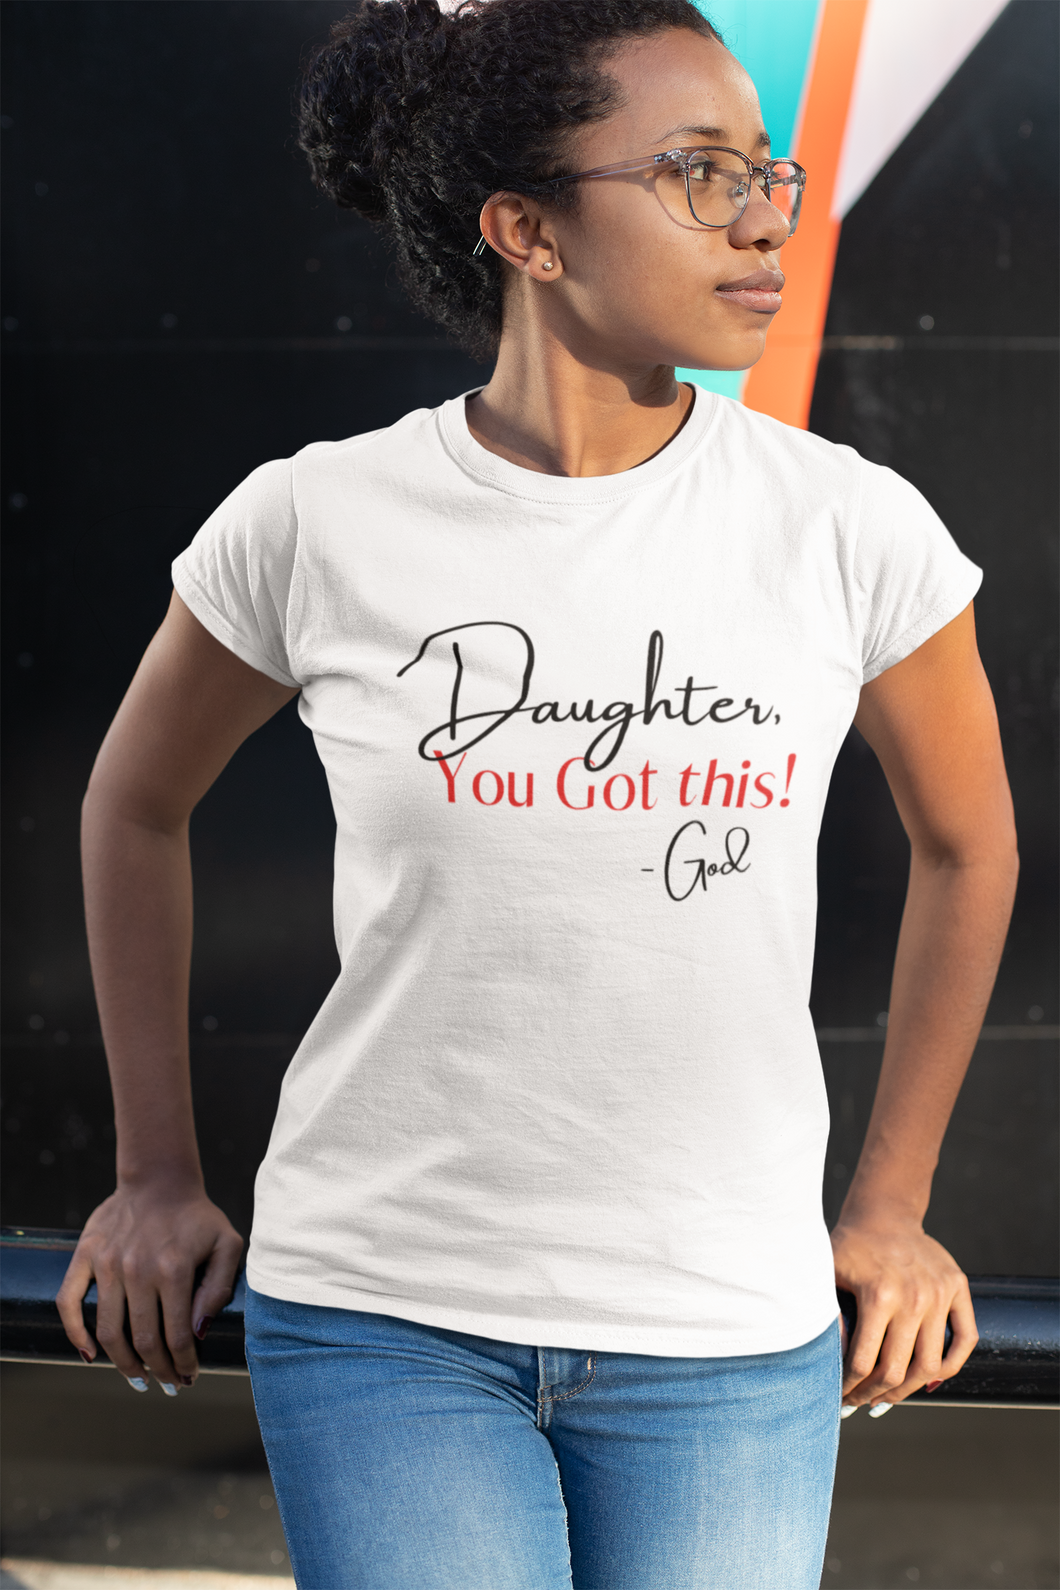 Message from God Shirt - You Got This